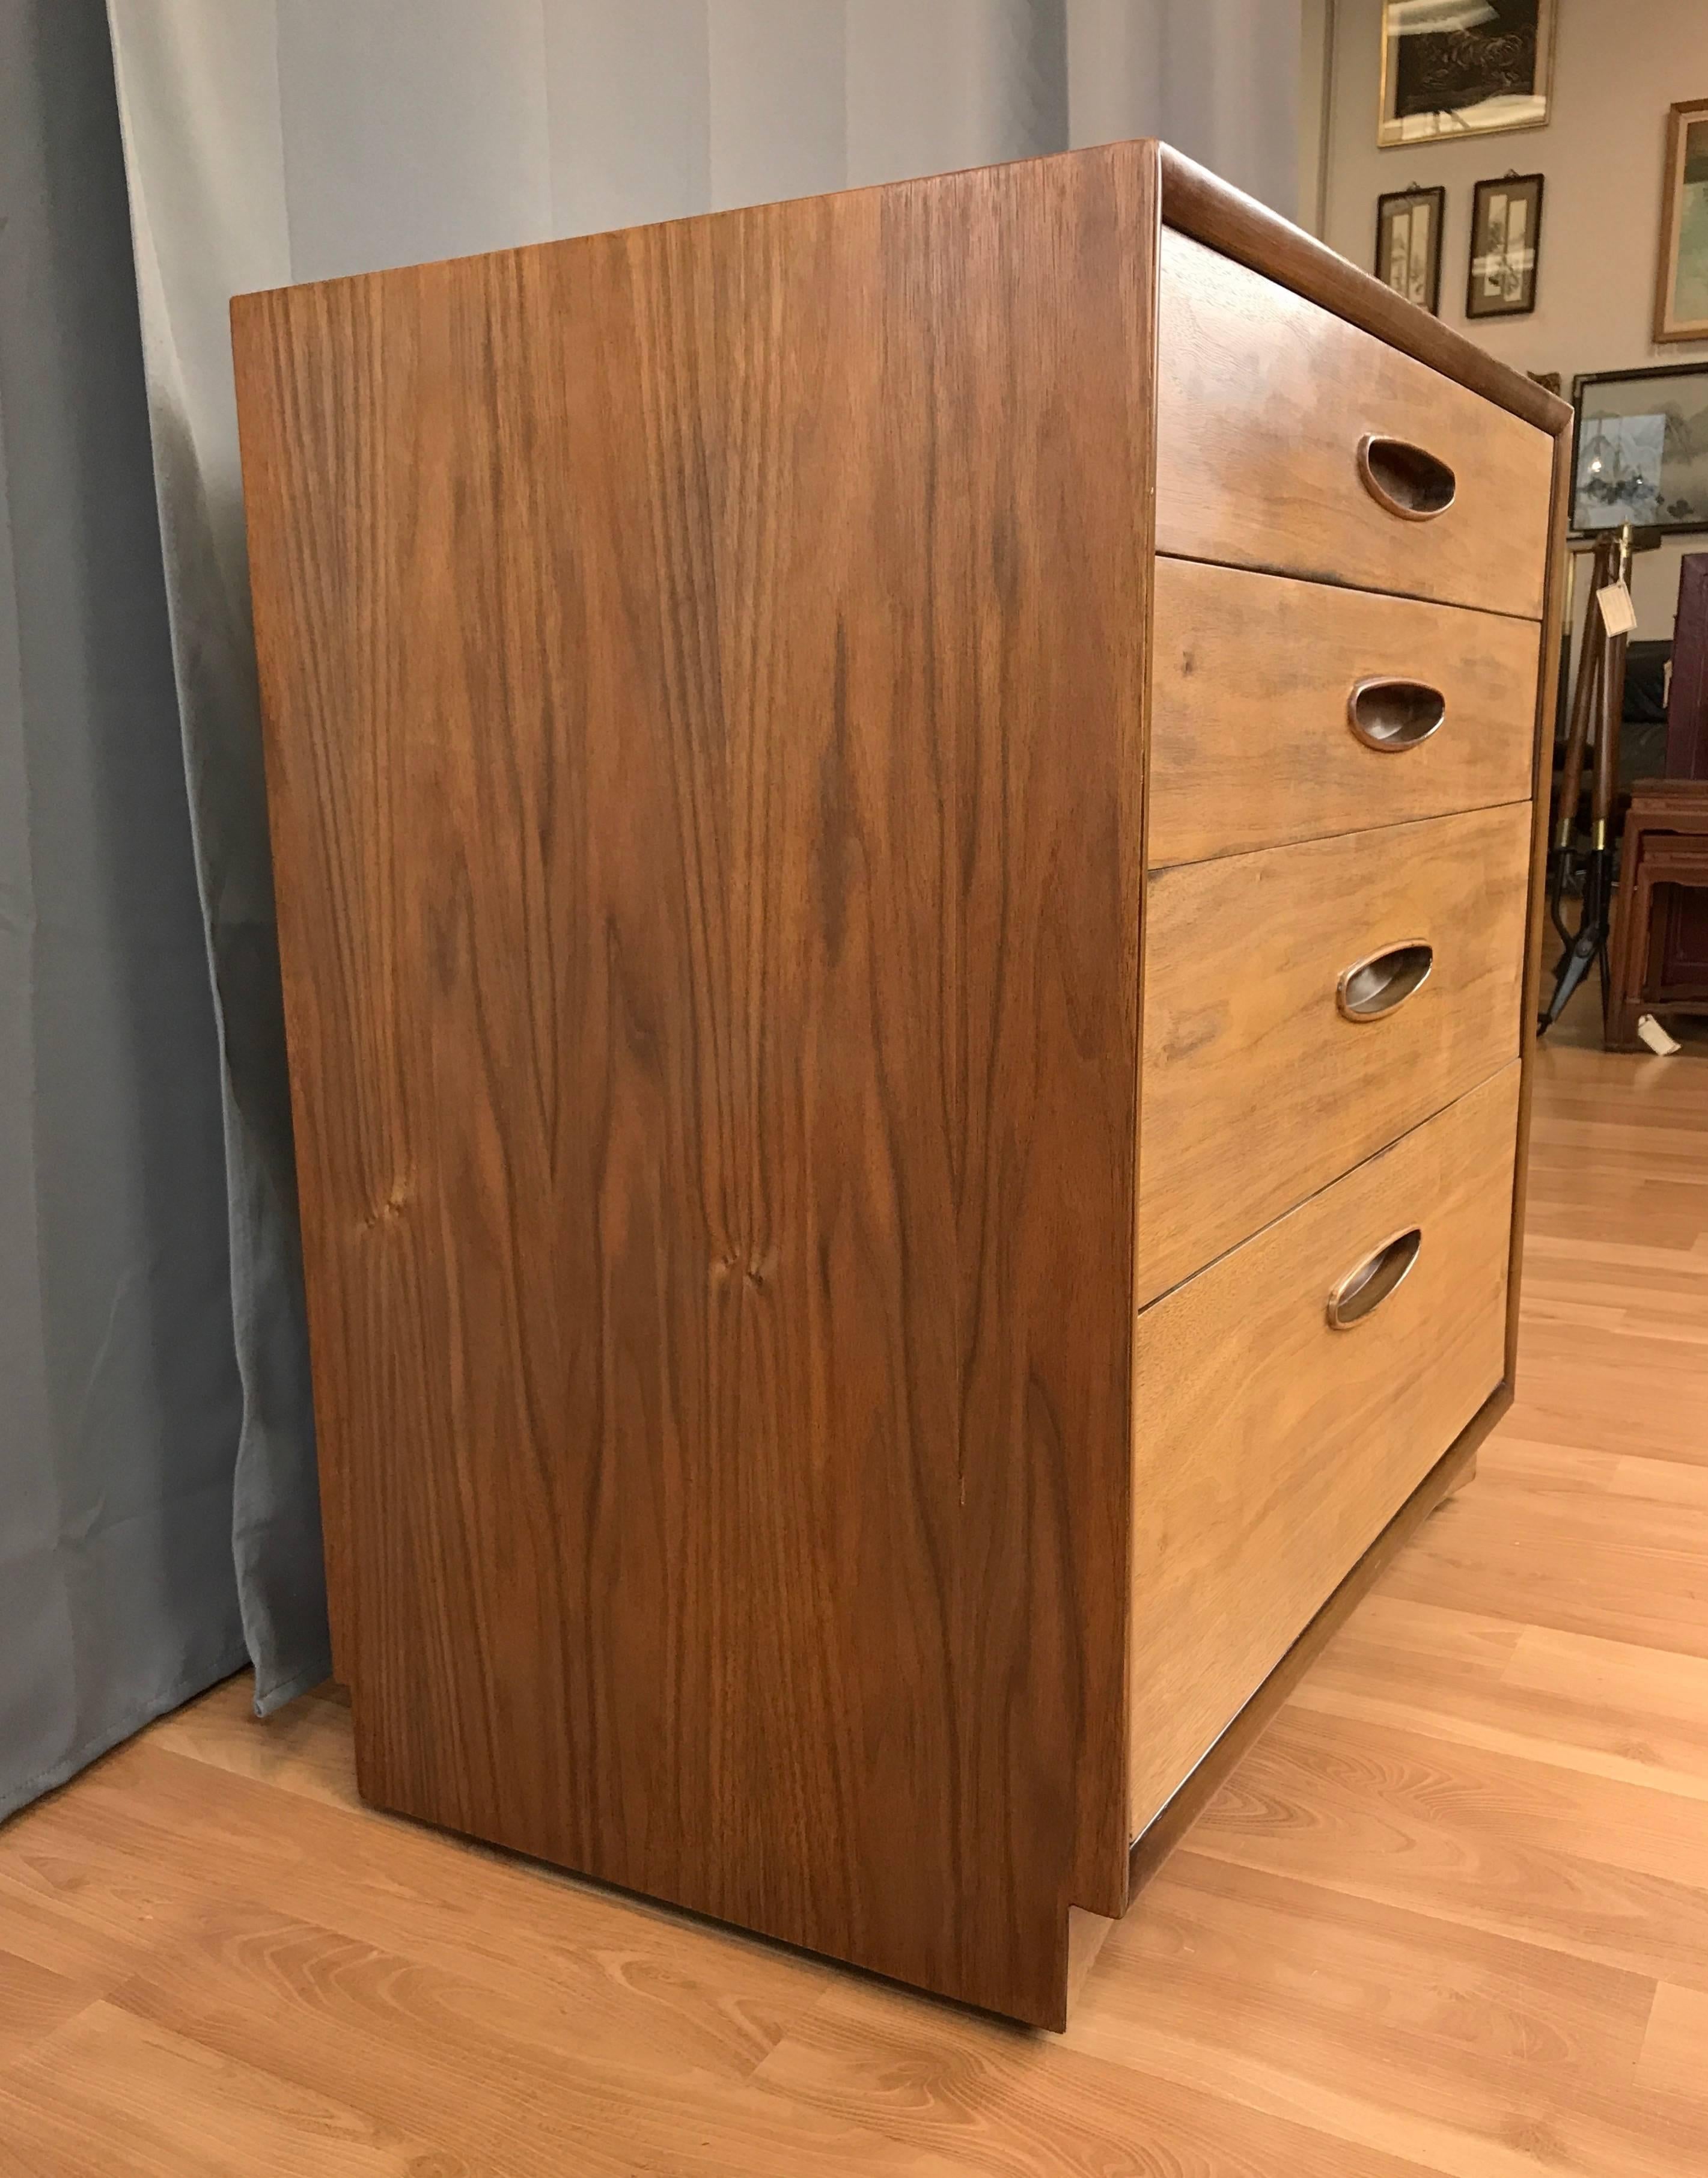 A four-drawer walnut bachelor’s chest from Henredon’s mid-century modern “Circa ’60 Collection”.

Introduced in the 1950s, Henredon’s ads from that time described their forward-looking “Circa ’60 Collection” as being “designed to blend with any